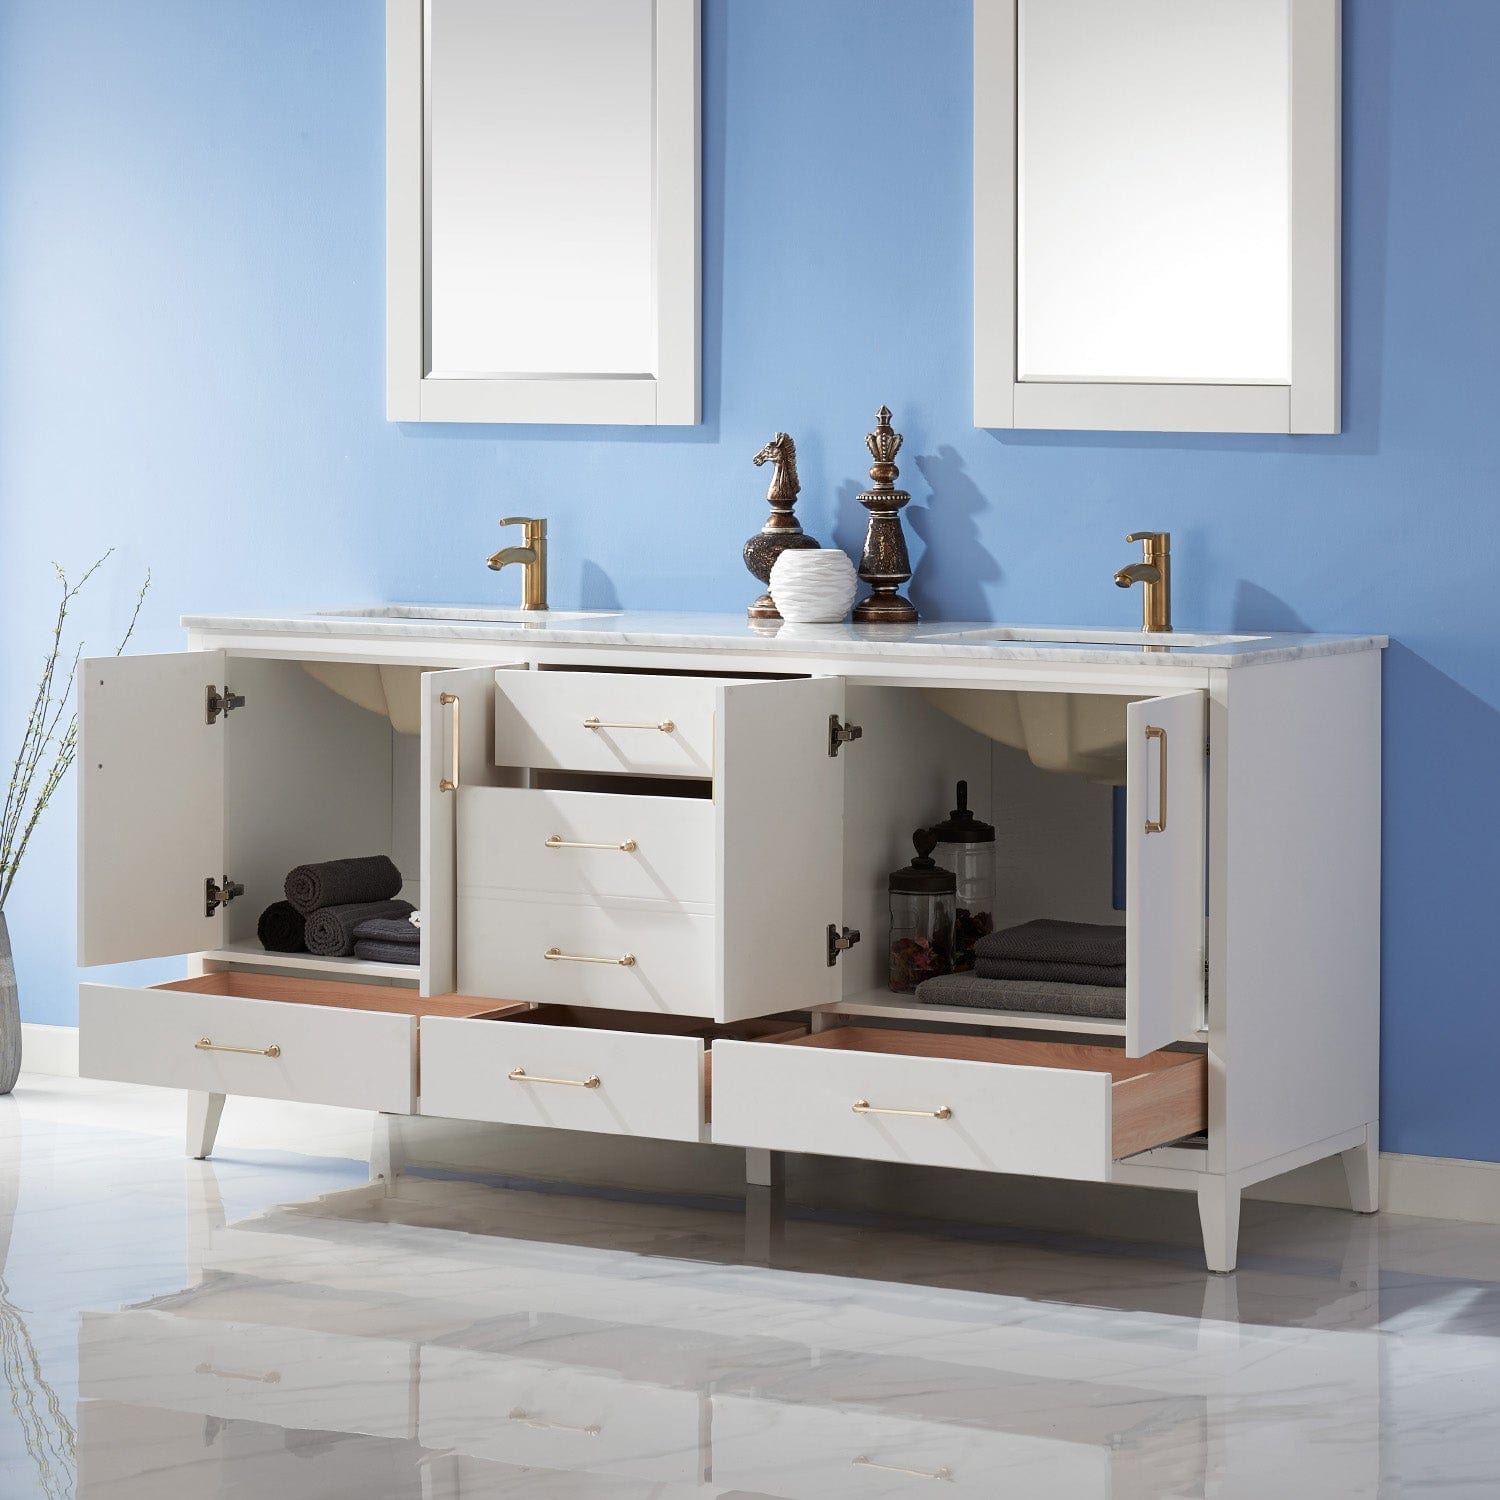 Altair Sutton 72" Double Bathroom Vanity Set in White and Carrara White Marble Countertop with Mirror 541072-WH-CA - Molaix631112972031Vanity541072-WH-CA